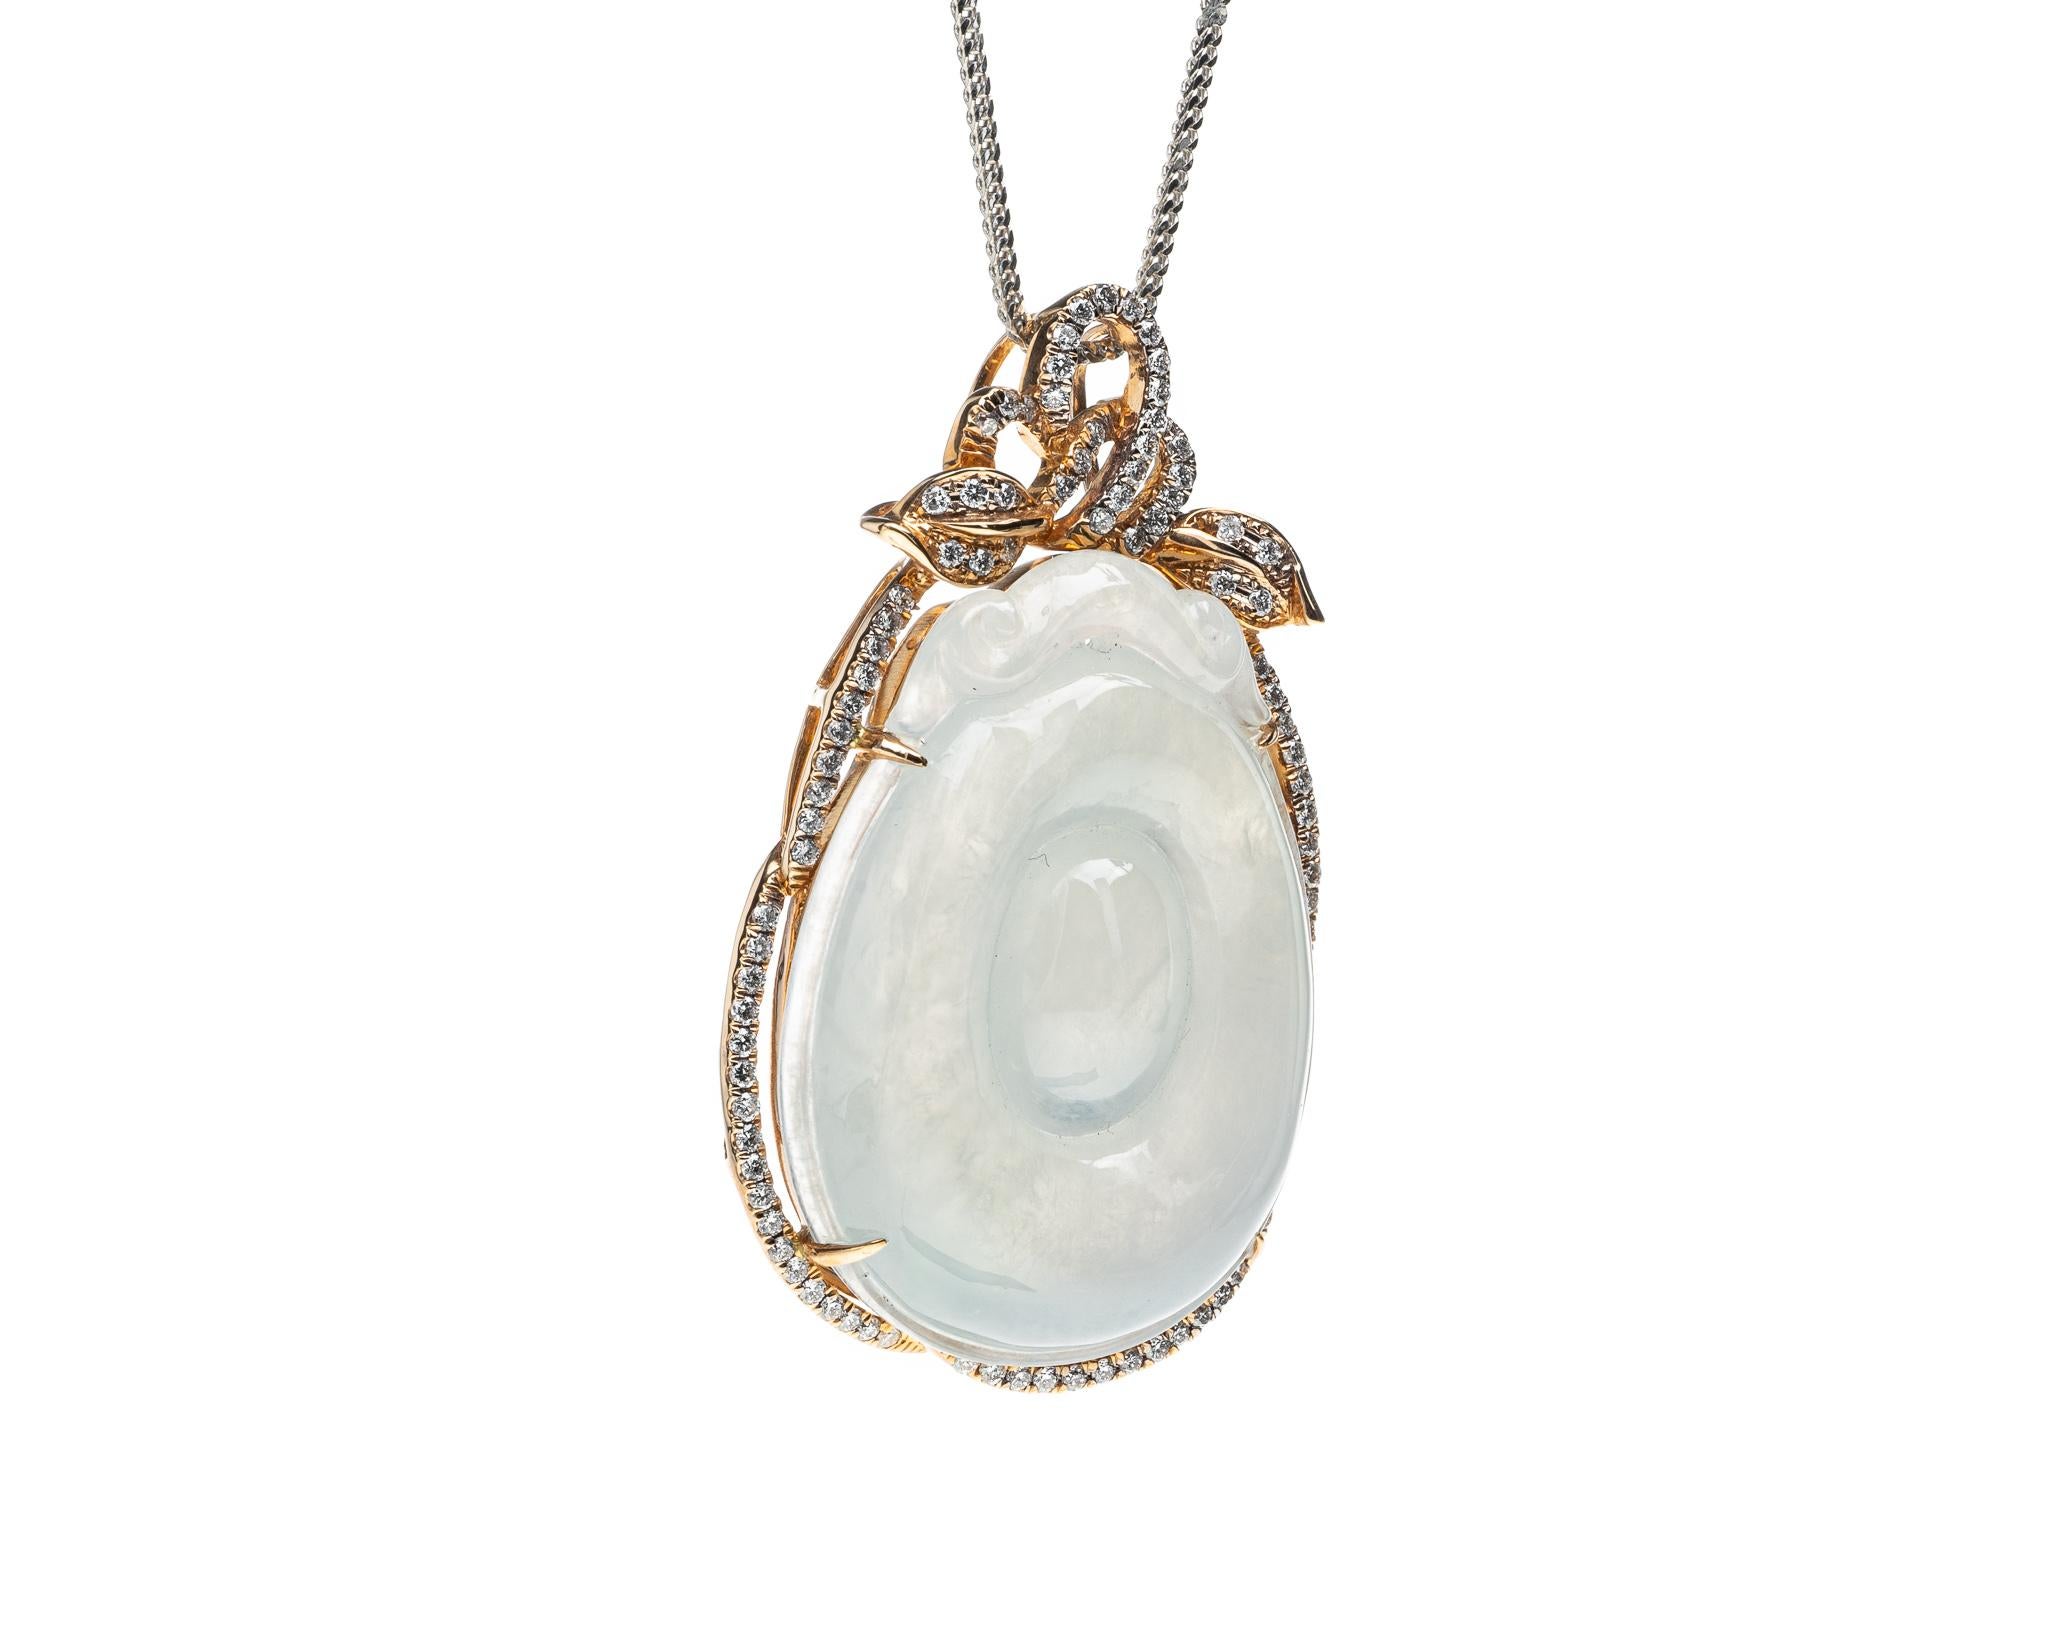 This is an all natural, untreated jadeite jade carved gold coin and diamond pendant set on an 18K rose gold and diamond bail.  The carved gold coin symbolizes wealth and prosperity.
.   
It measures 1.73 inches (44 mm) x 1.01 inches (25.9 mm) with